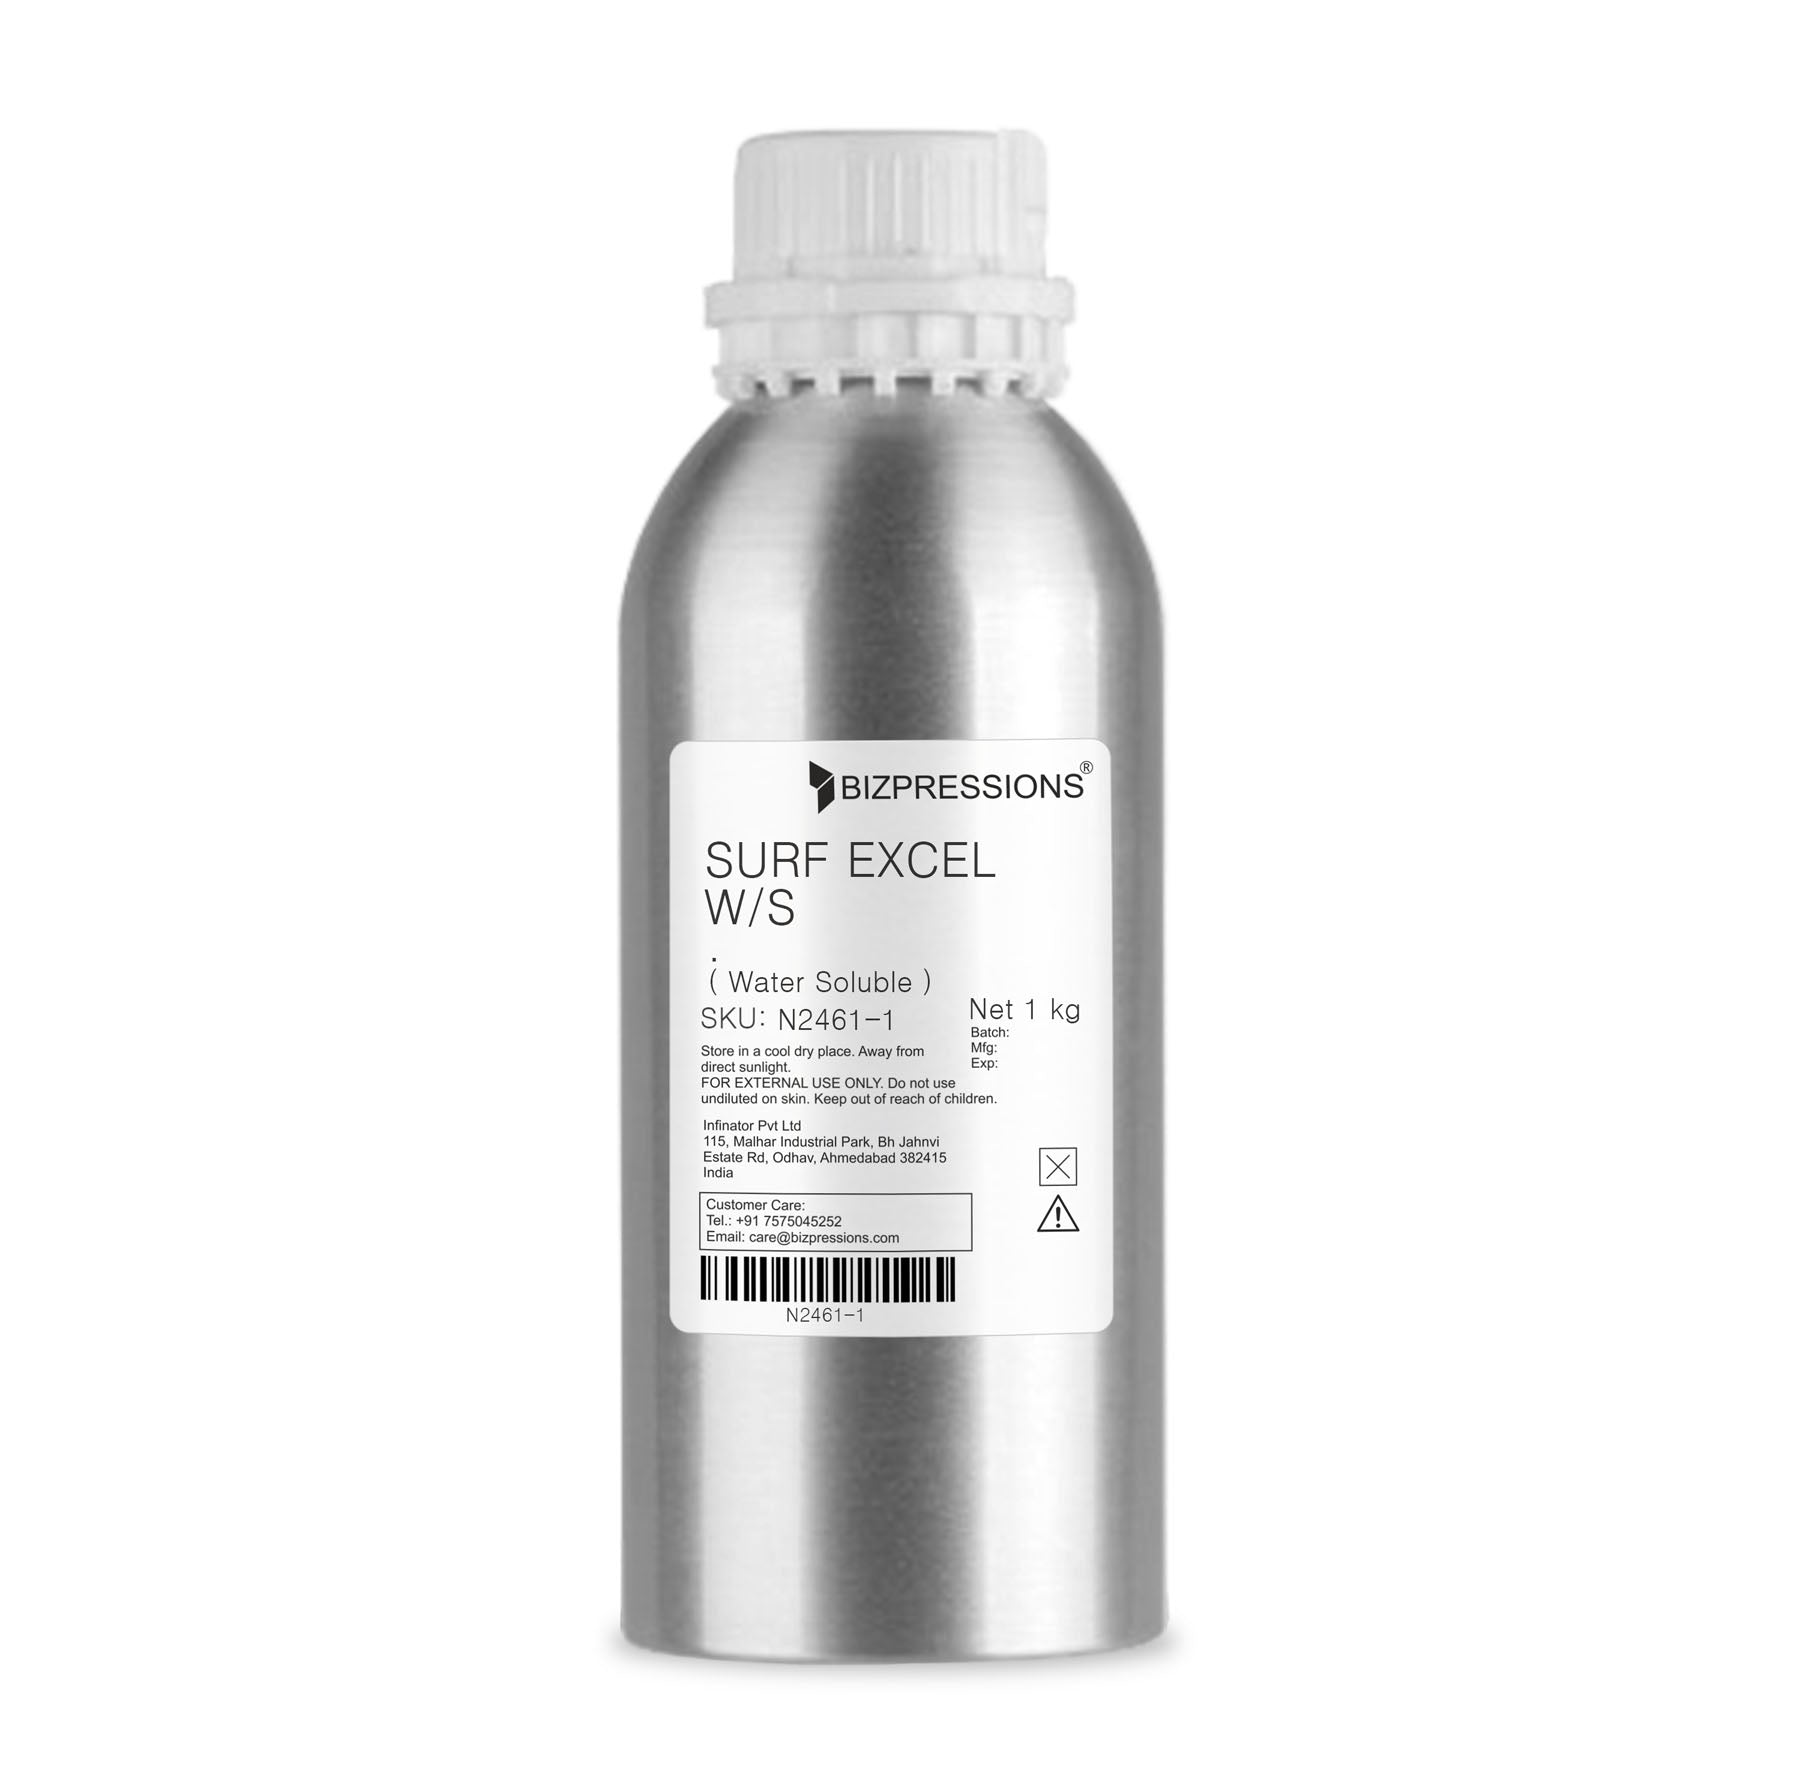 SURF EXCEL W/S - Fragrance ( Water Soluble ) - 1 kg